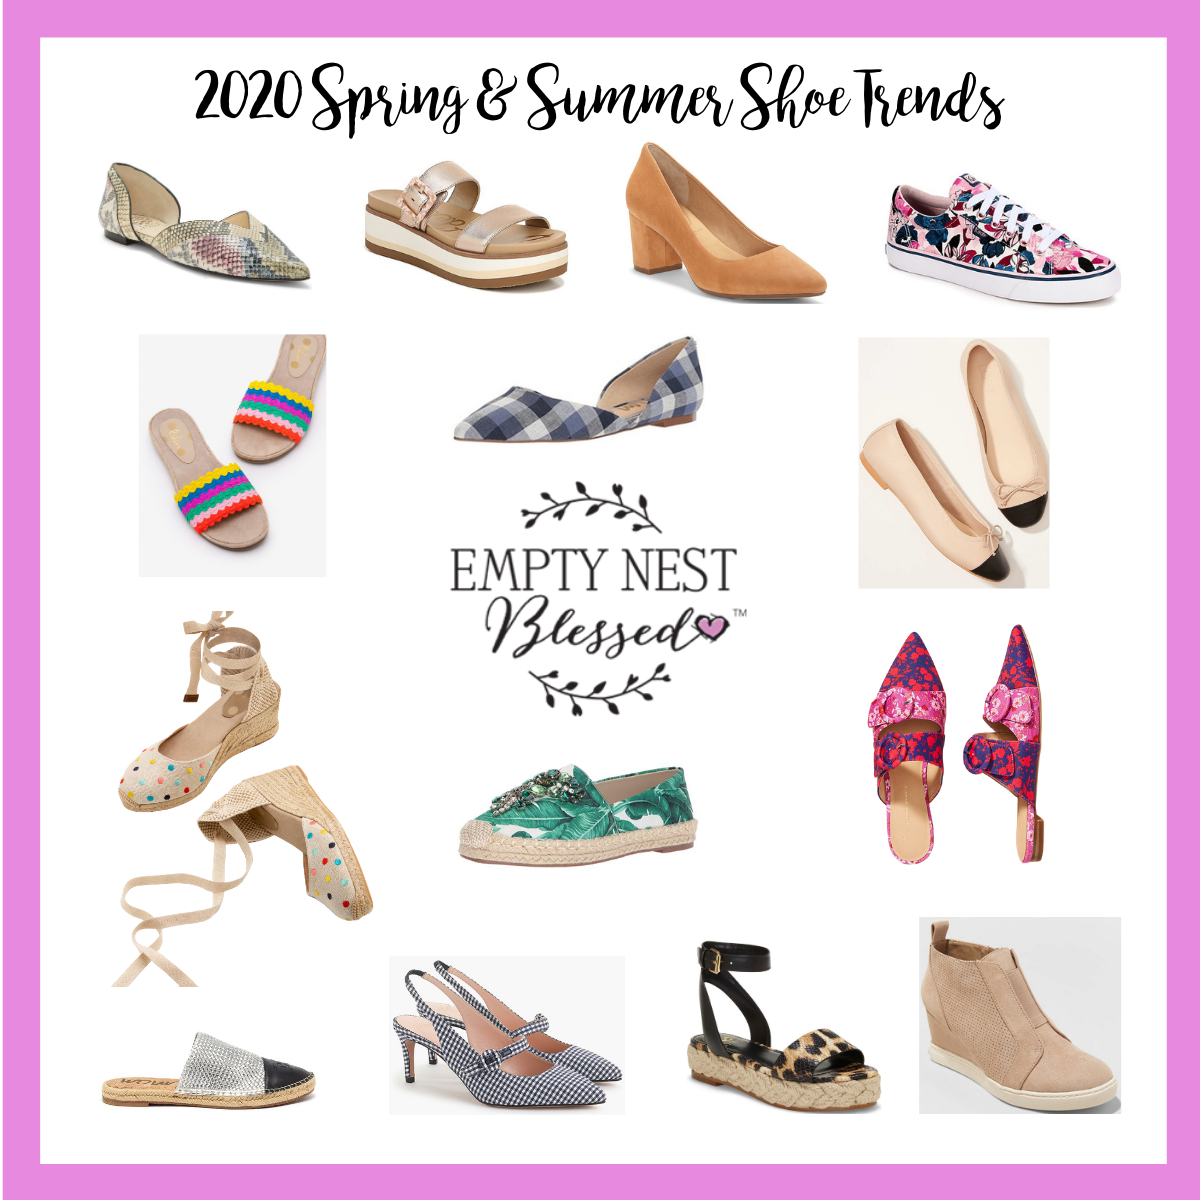 2020 Spring & Summer Shoe Trends | The Hot Styles You Need to Know